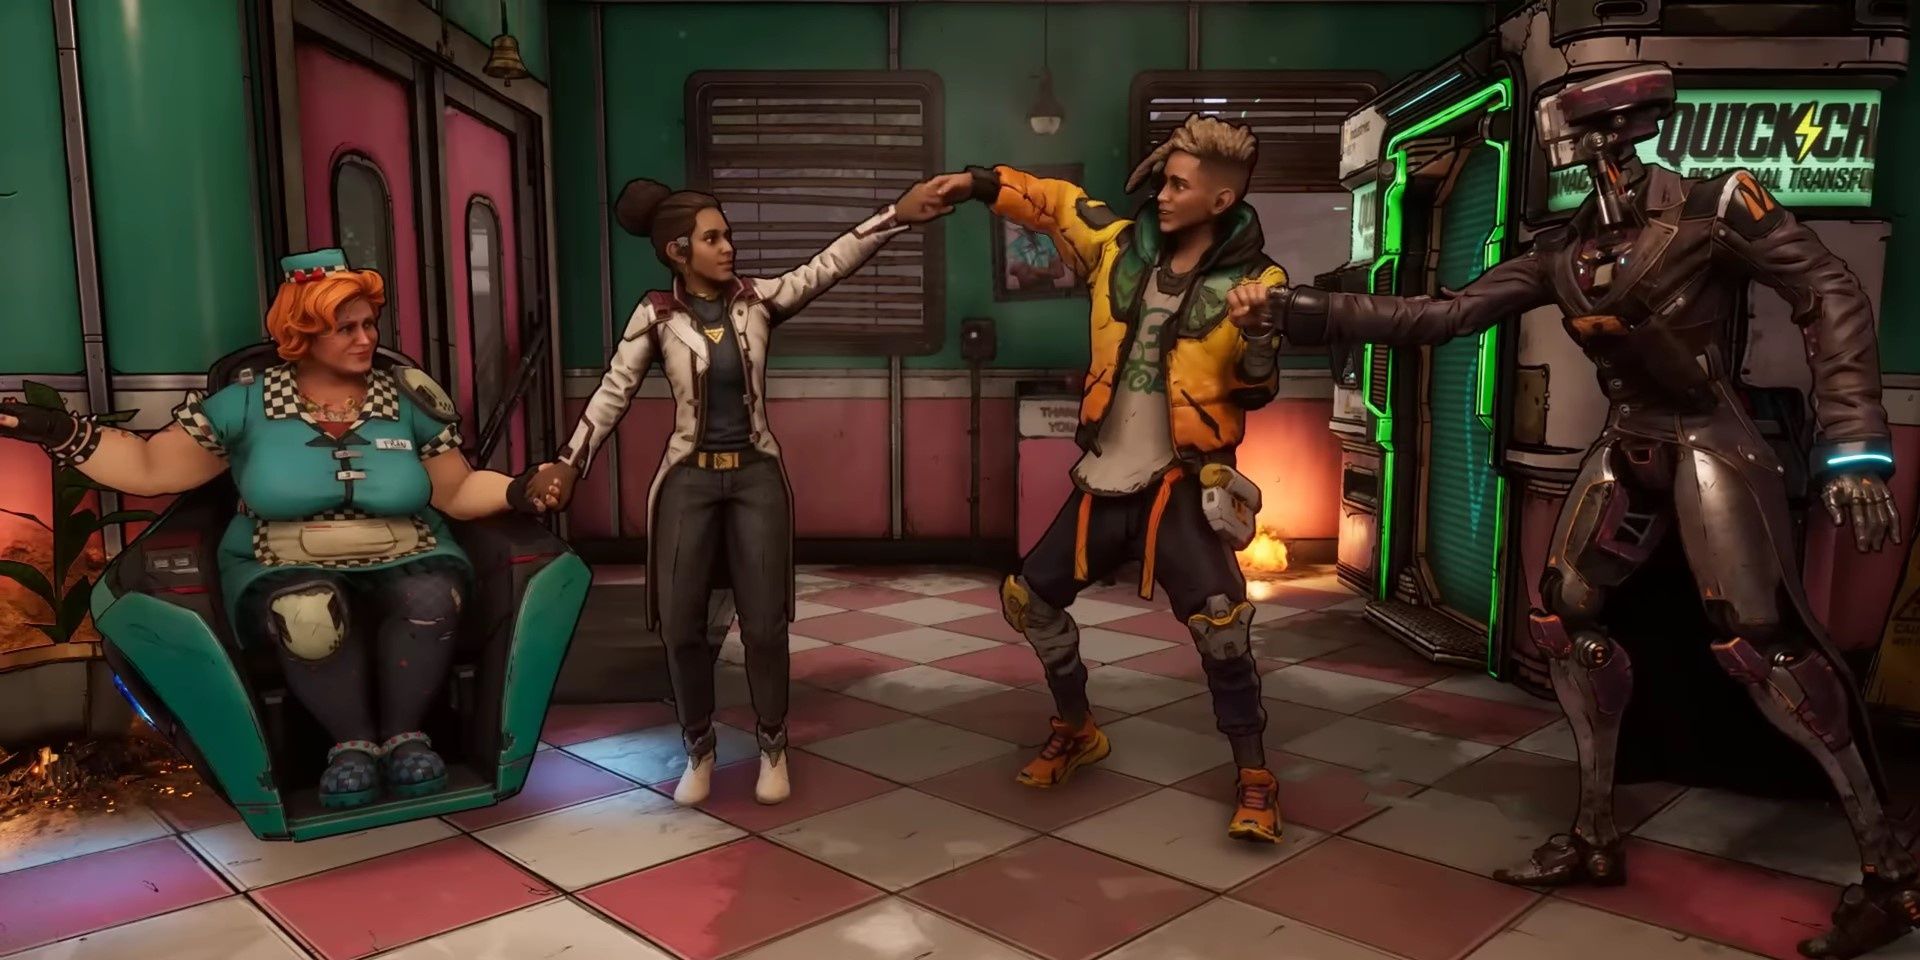 Screenshot of the main squad doing a wave during the montage sequence in New Tales from the Borderlands.